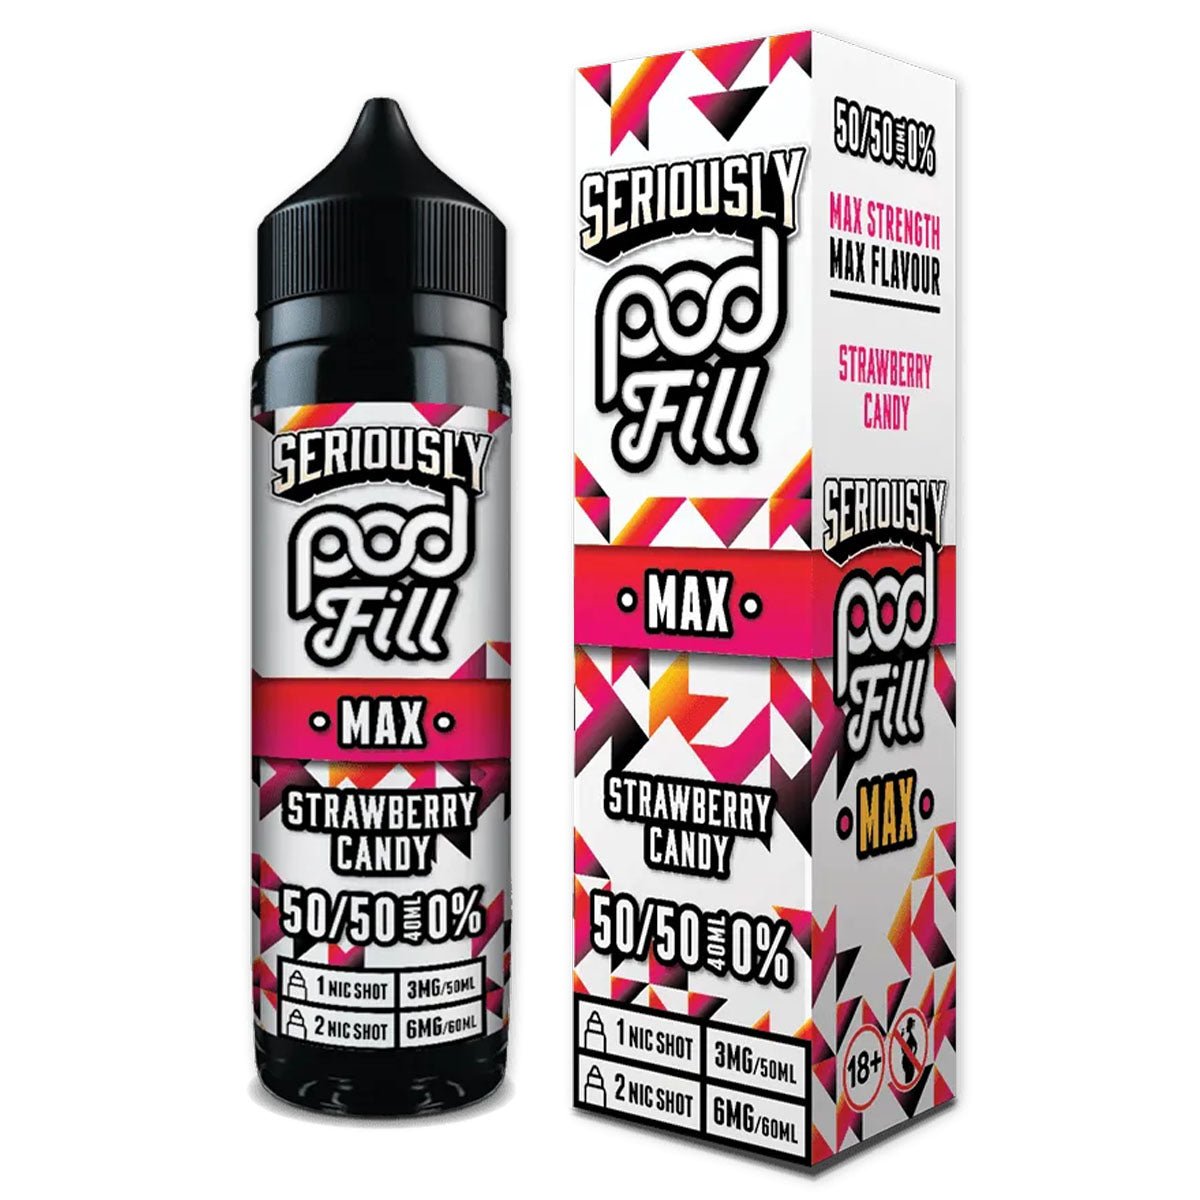 Strawberry Candy 40ml Longfill Concentrate By Seriously Pod Fill Max - Prime Vapes UK